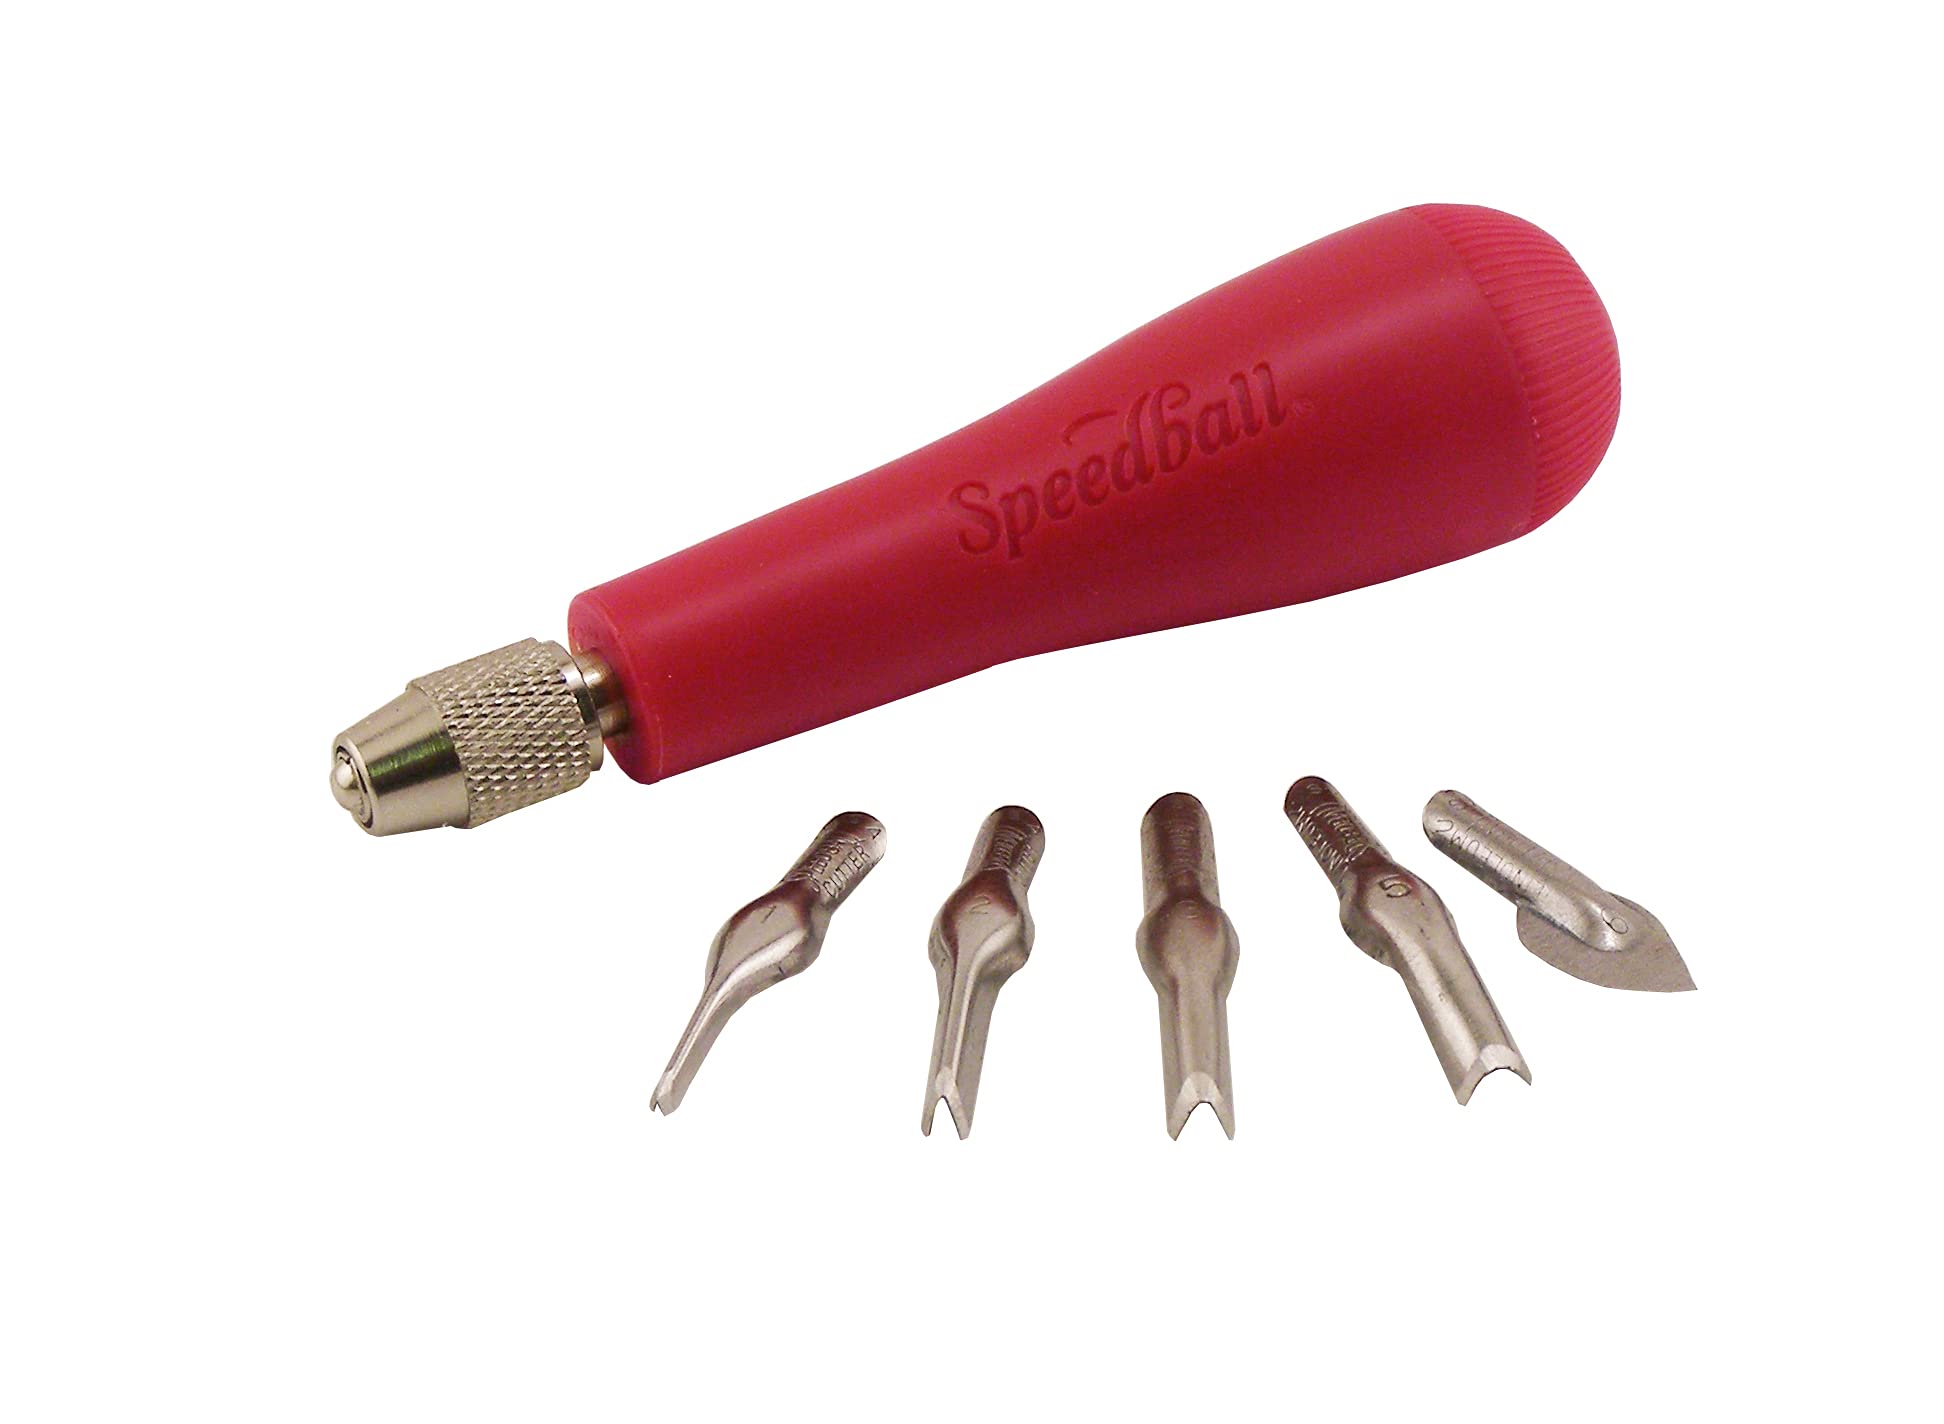 Speedball Linoleum Cutter Kit Assortment #1 - Linocut Carving Tools for  Block Printing, Includes 5 Blades Red